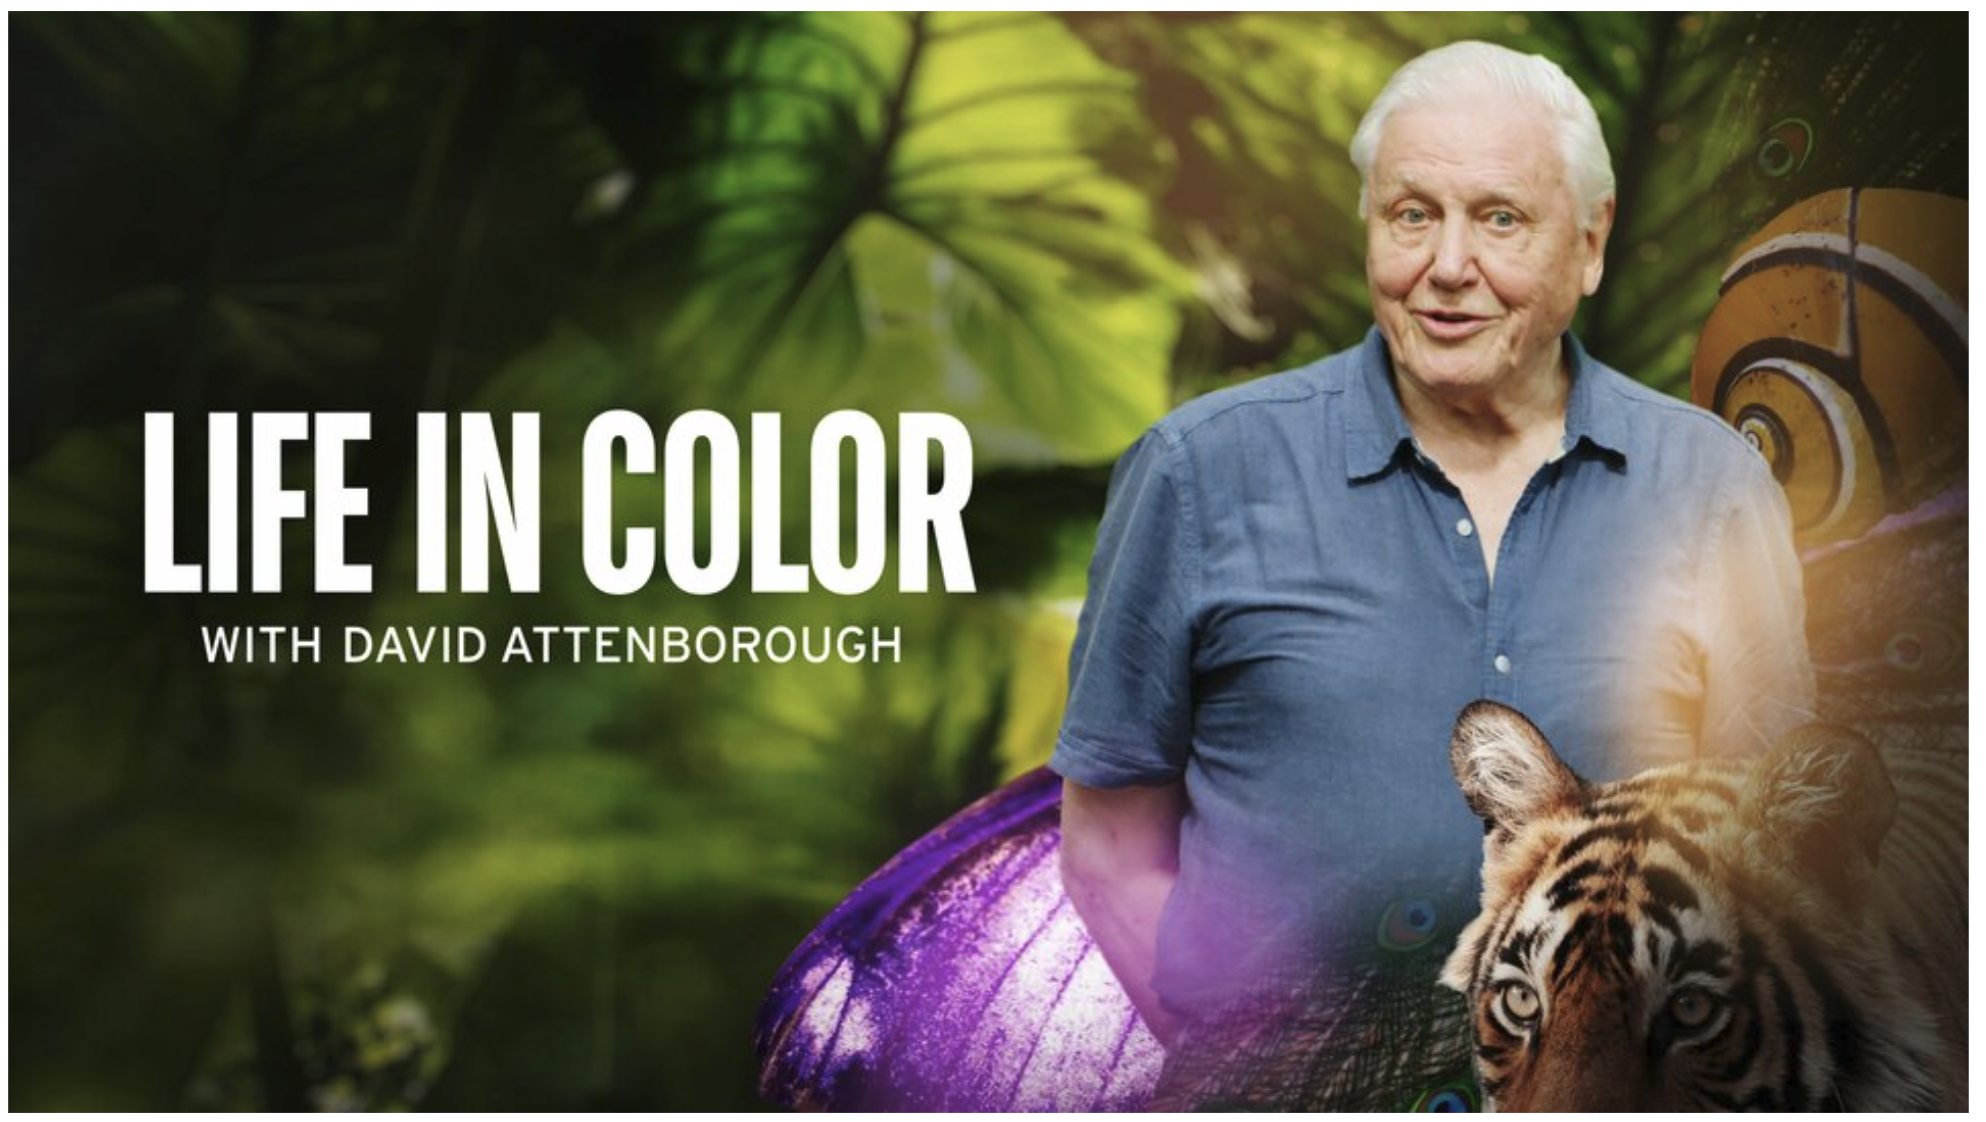 Life in Color with David Attenborough on Netflix